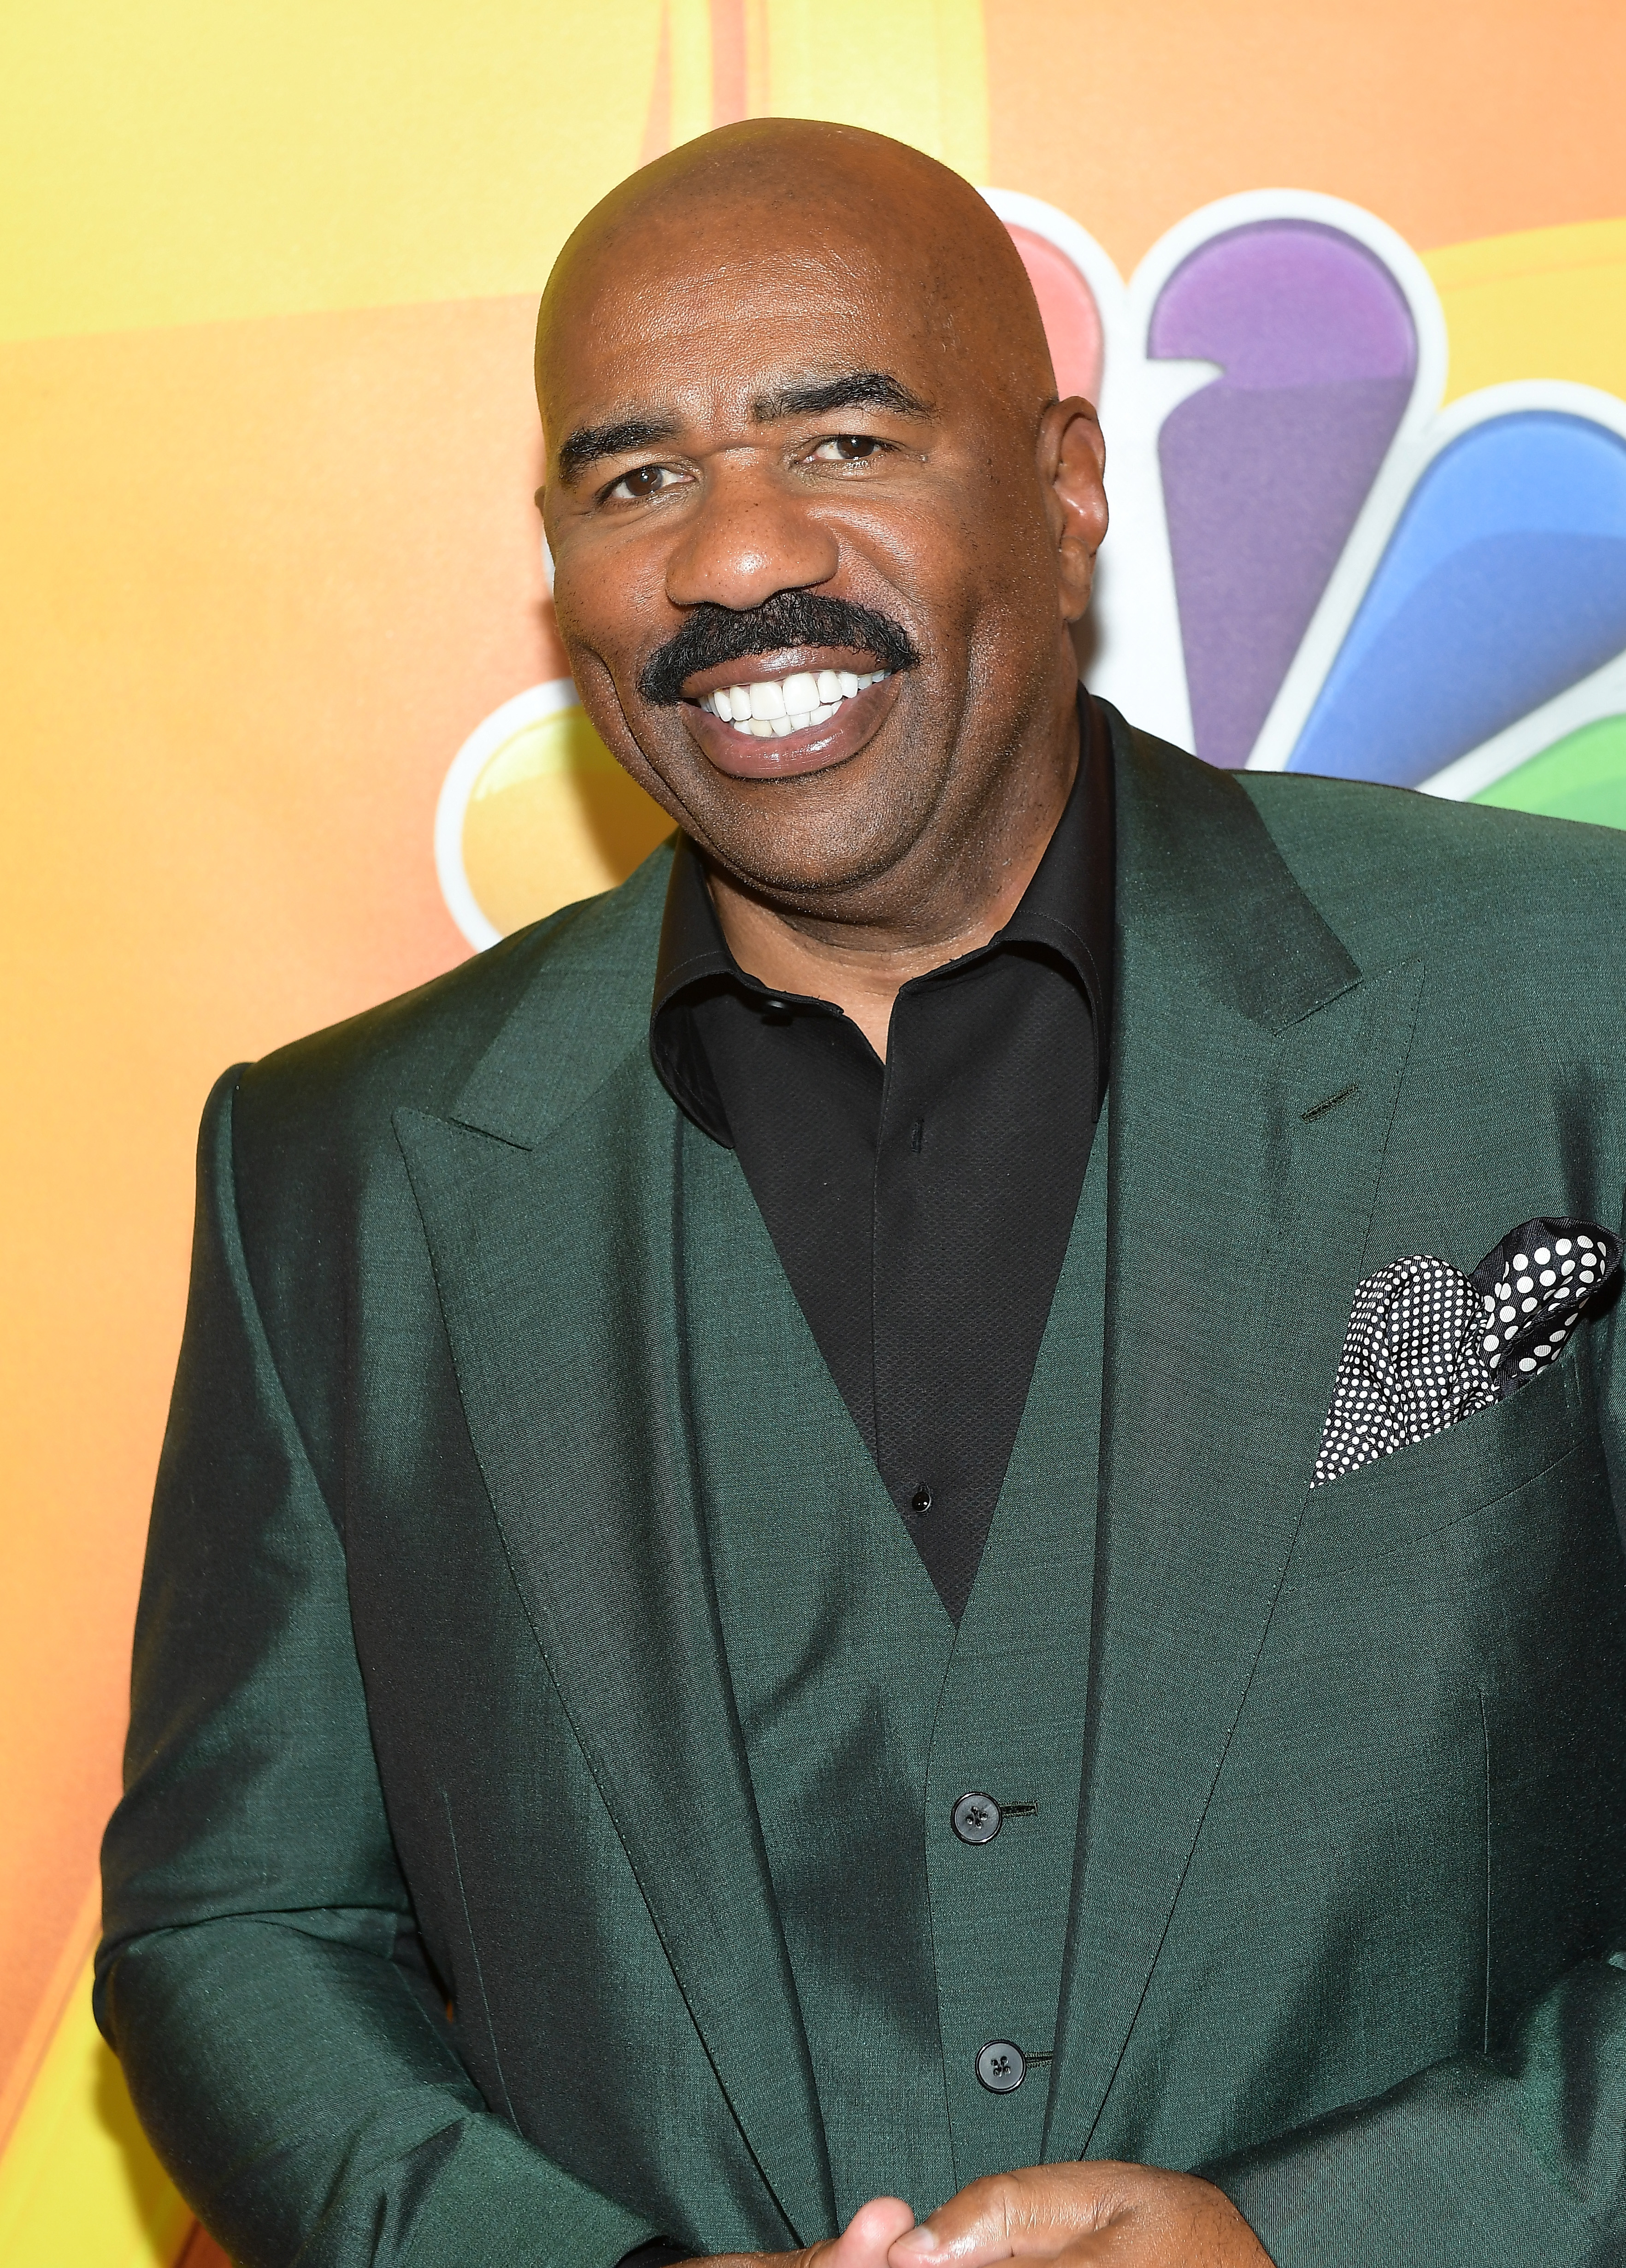 How much is junior from the steve harvey morning show worth?